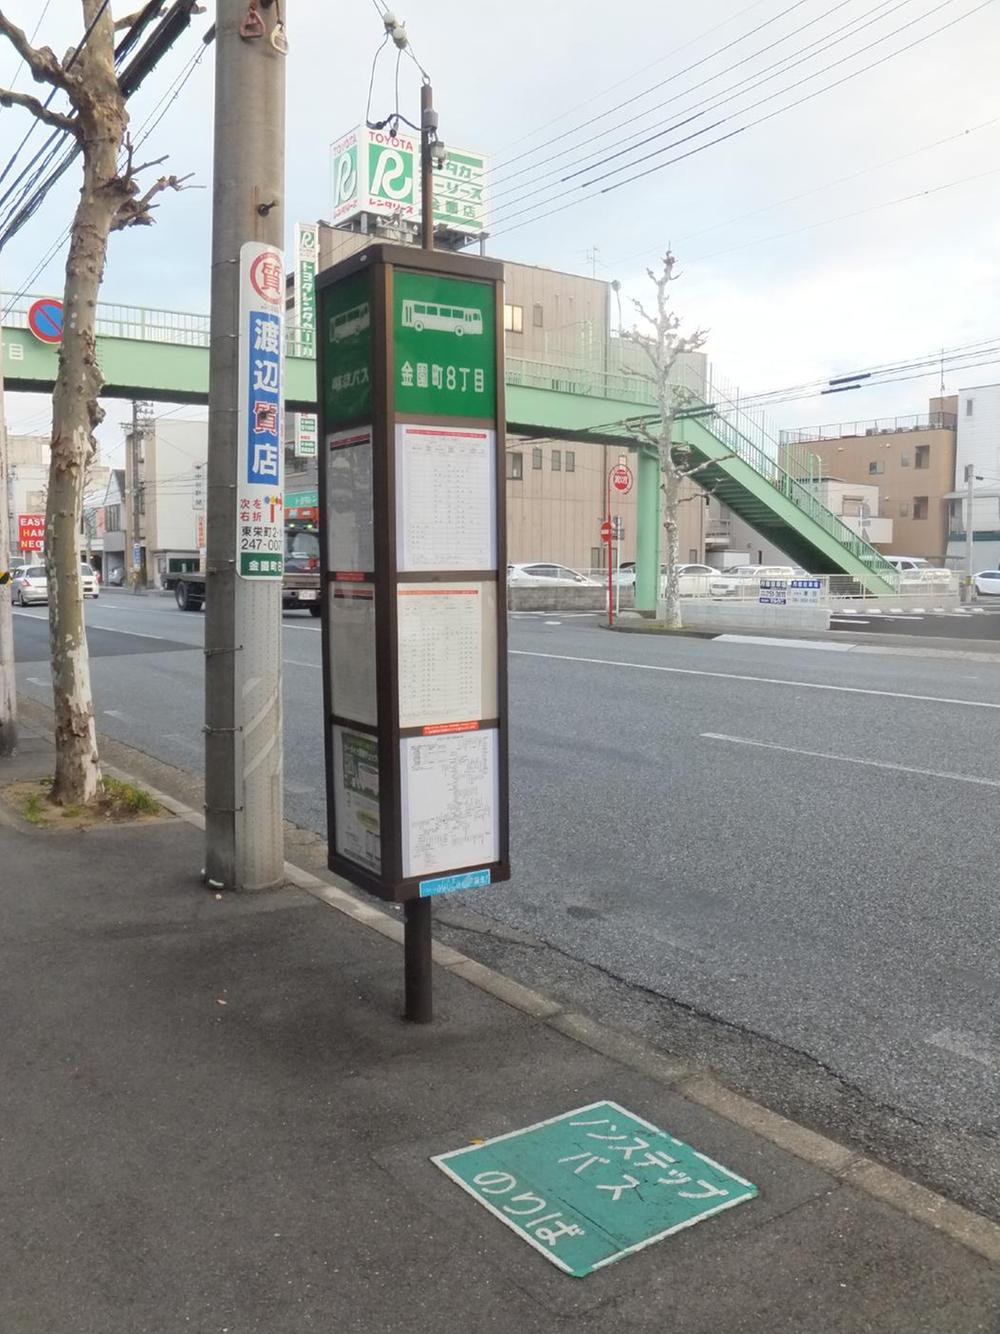 Other. The nearest bus stop